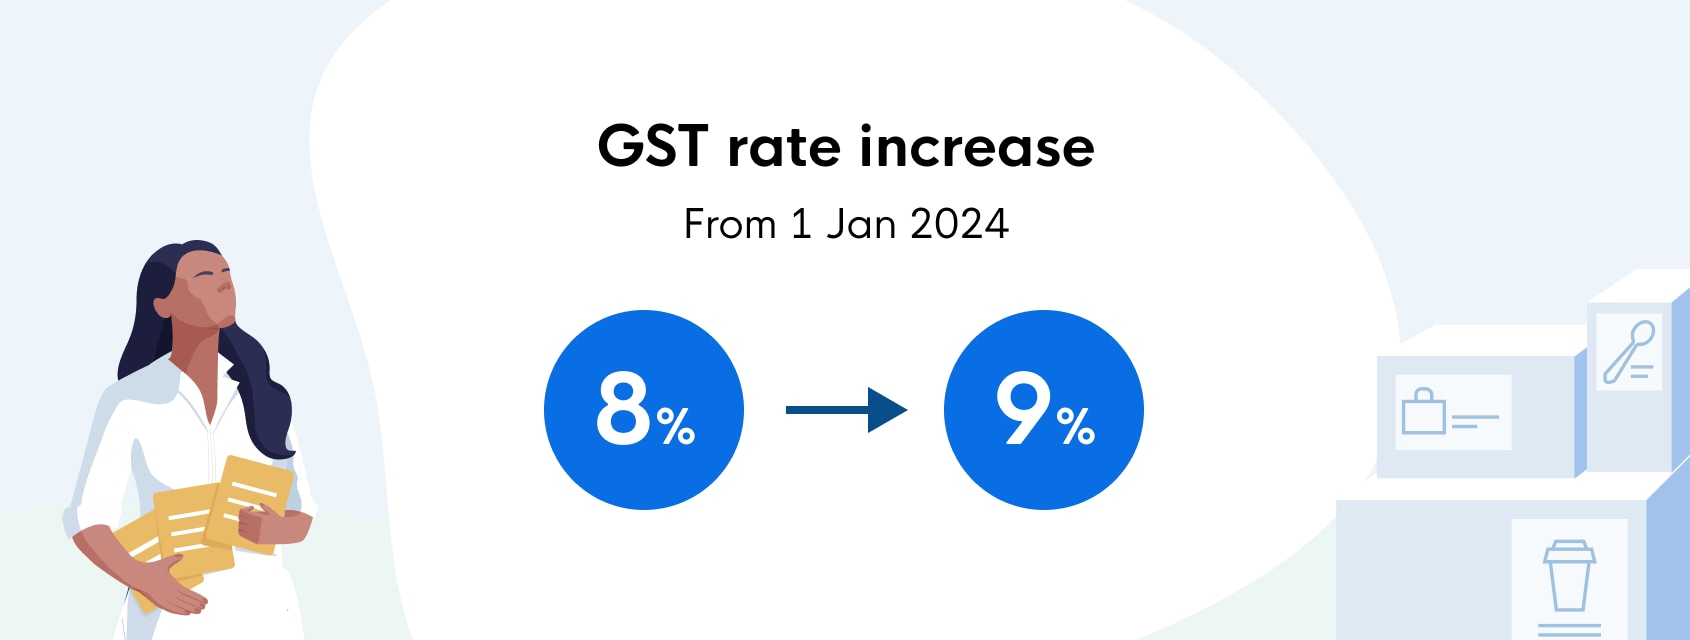 GST-registered businesses required to update systems and prices in lieu of the new 9% GST rate from 1 January 2024.